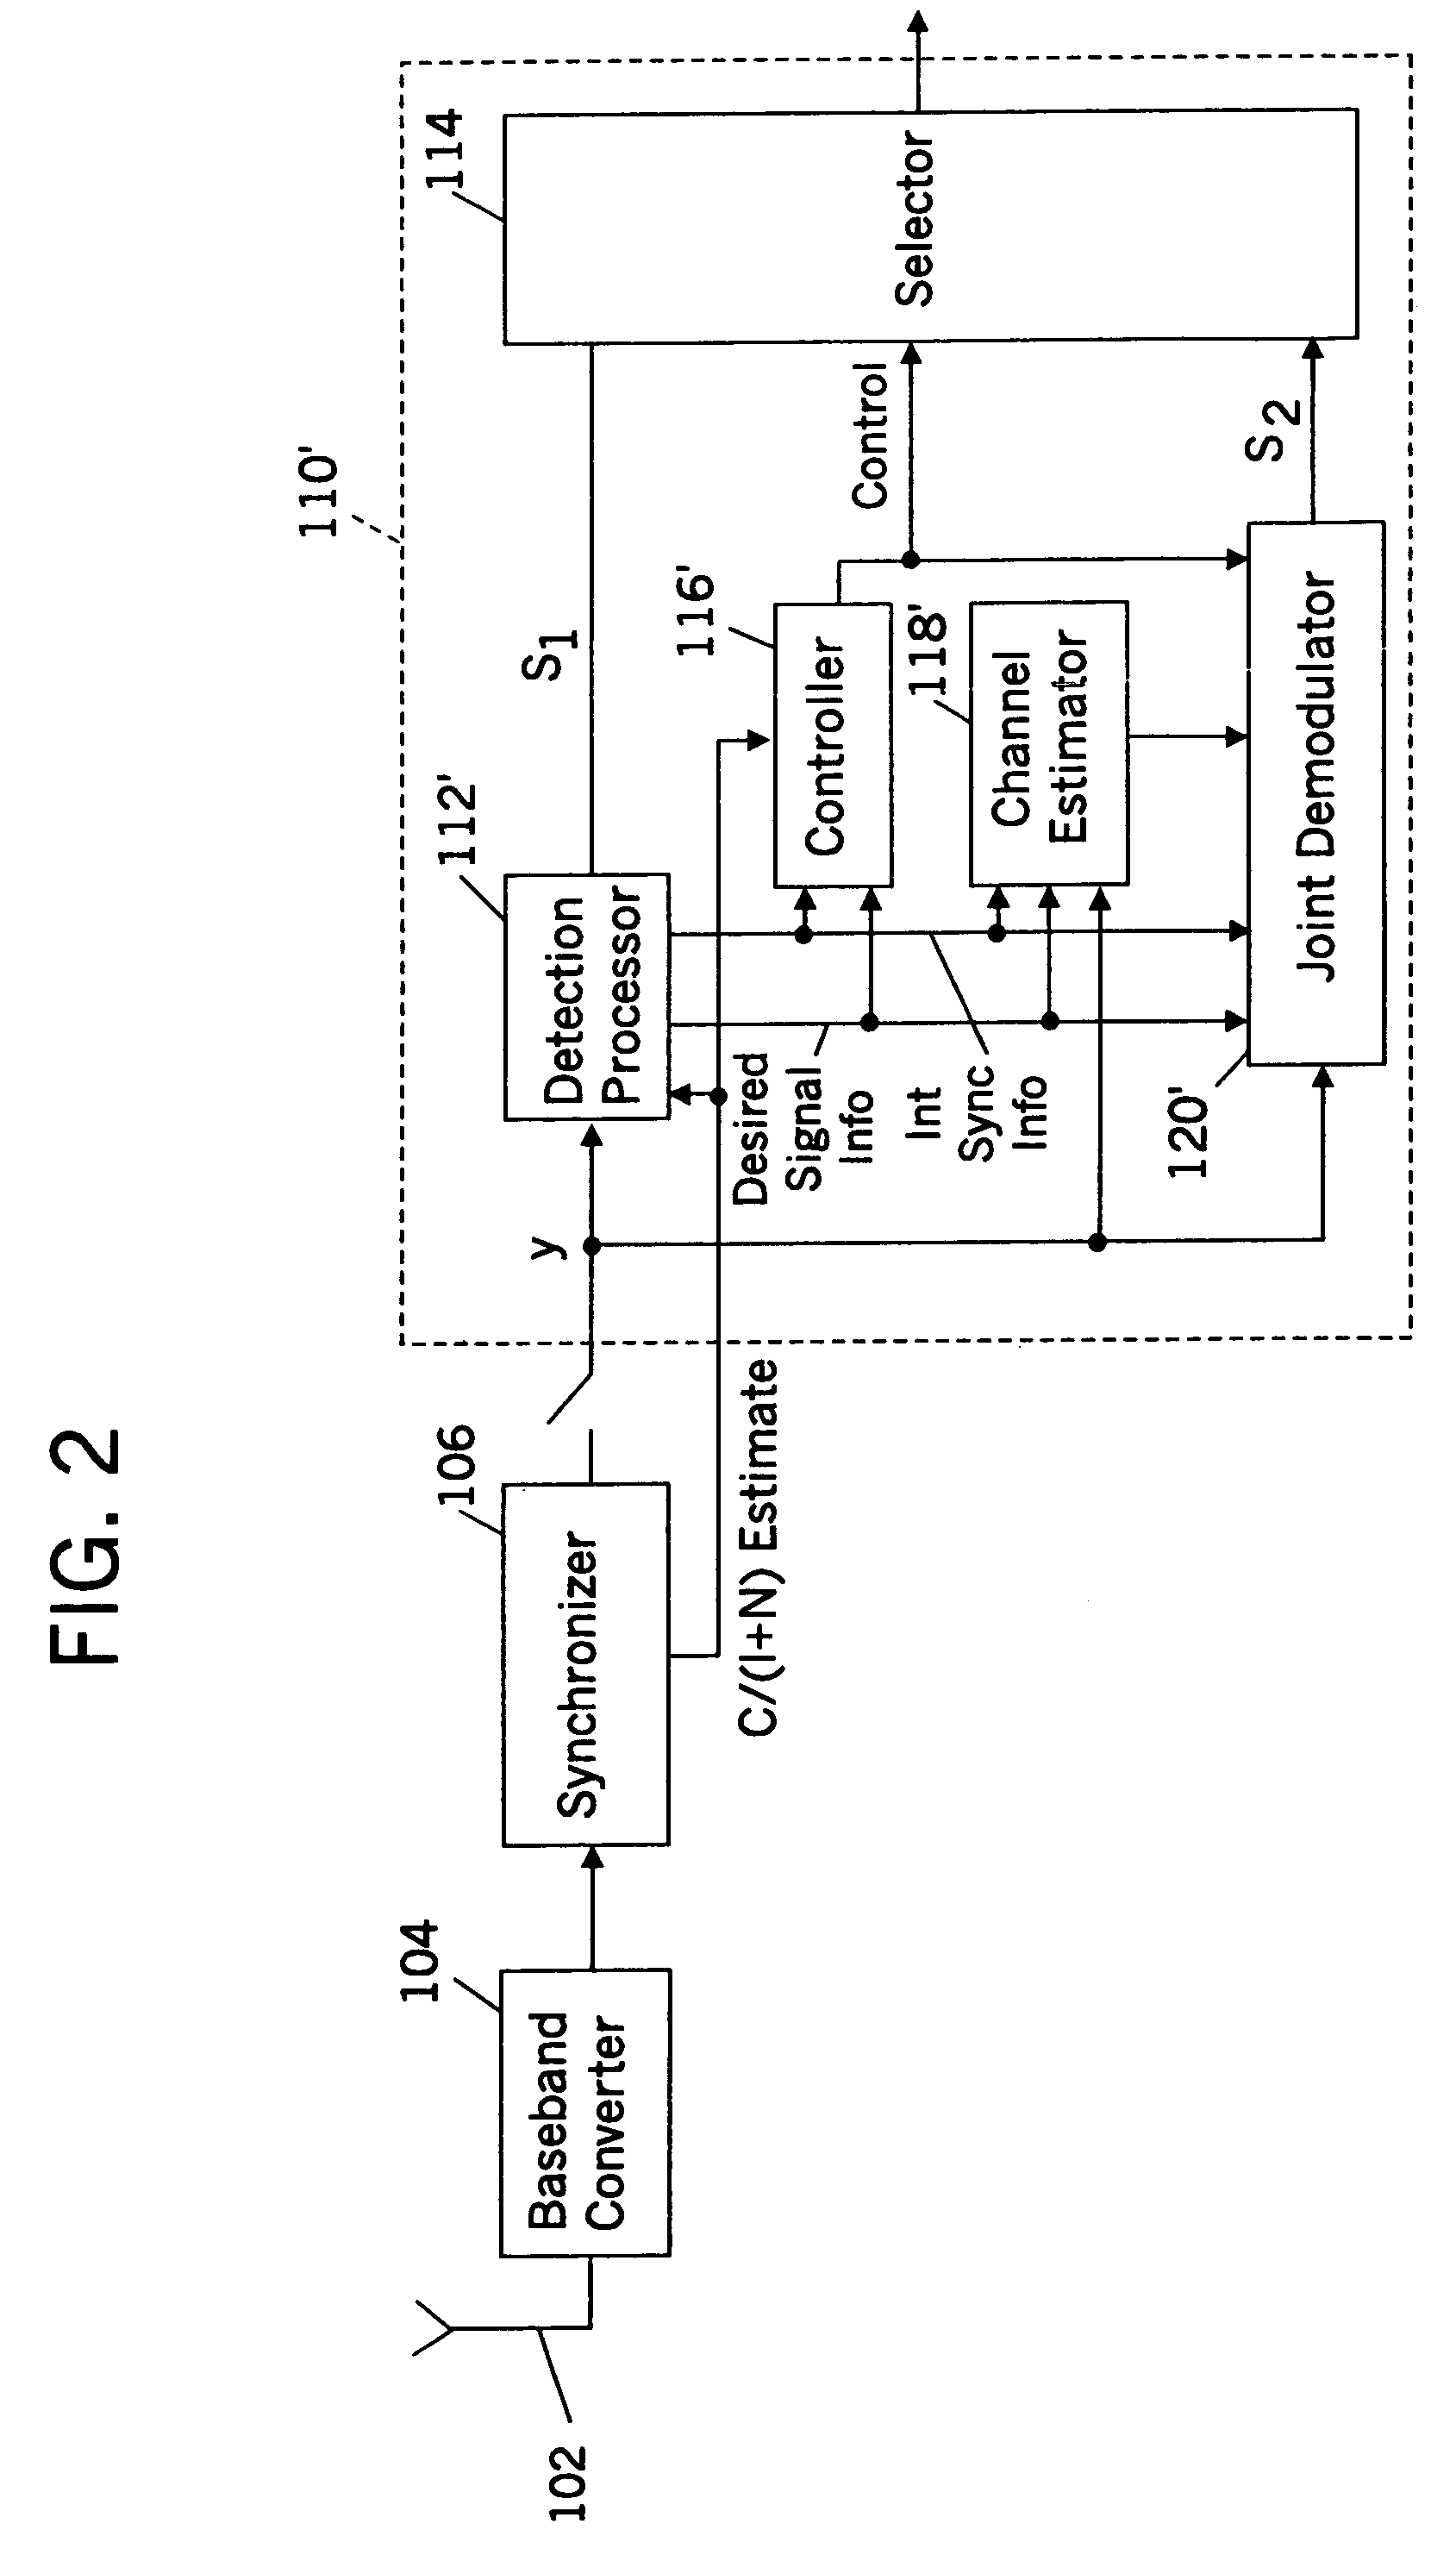 Selective joint demodulation systems and methods for receiving a signal in the presence of noise and interference